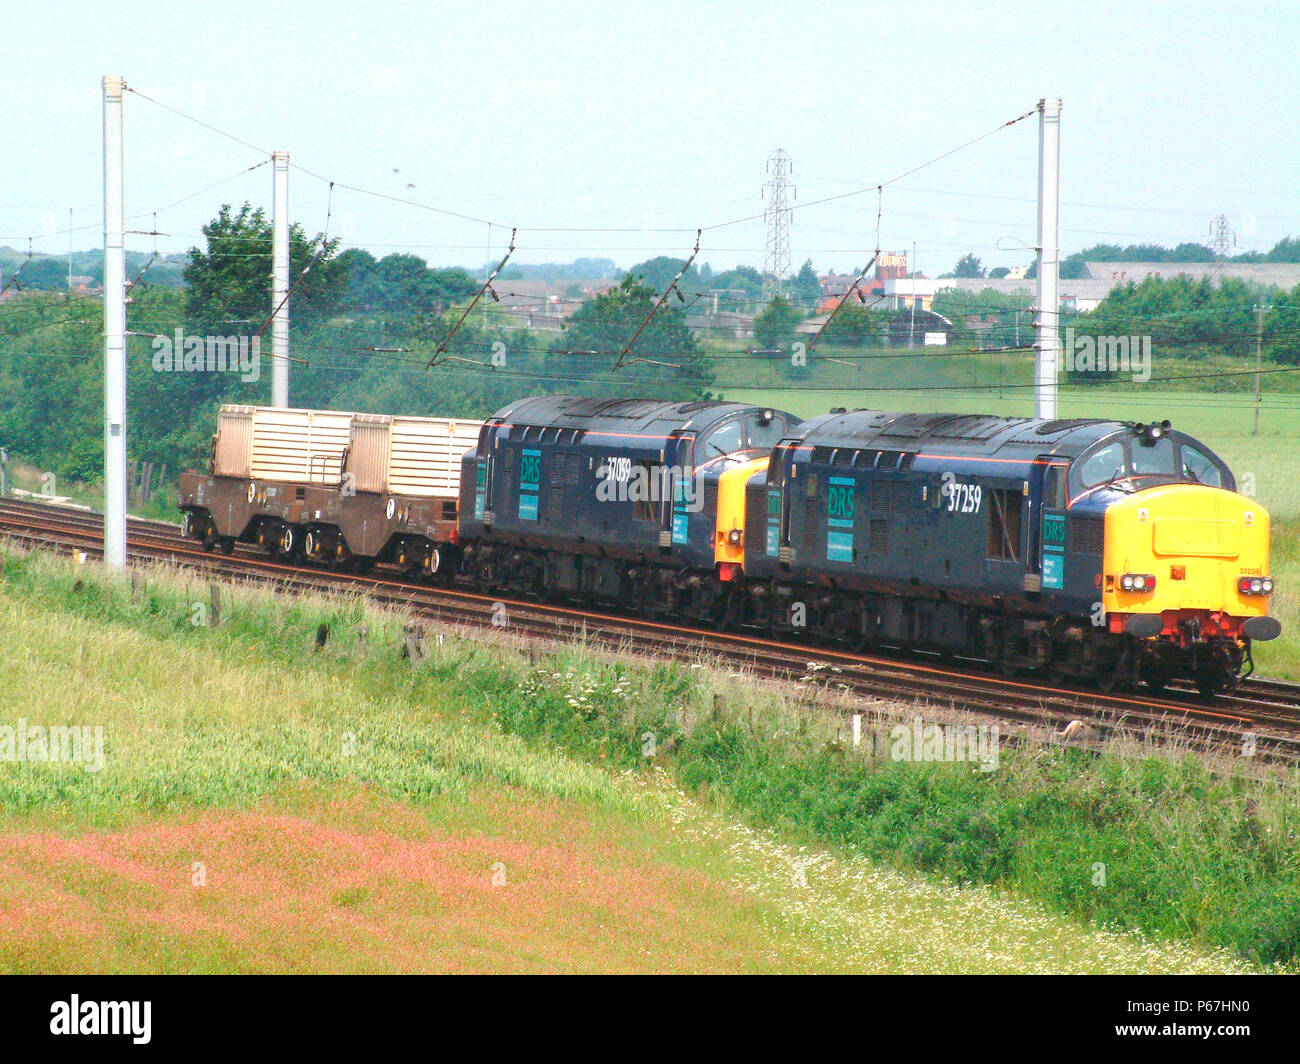 The nuclear facility at Sellafield generates a number of rail services powered by multiple locomotives such as this pair of Class 37 locomotives noted Stock Photo